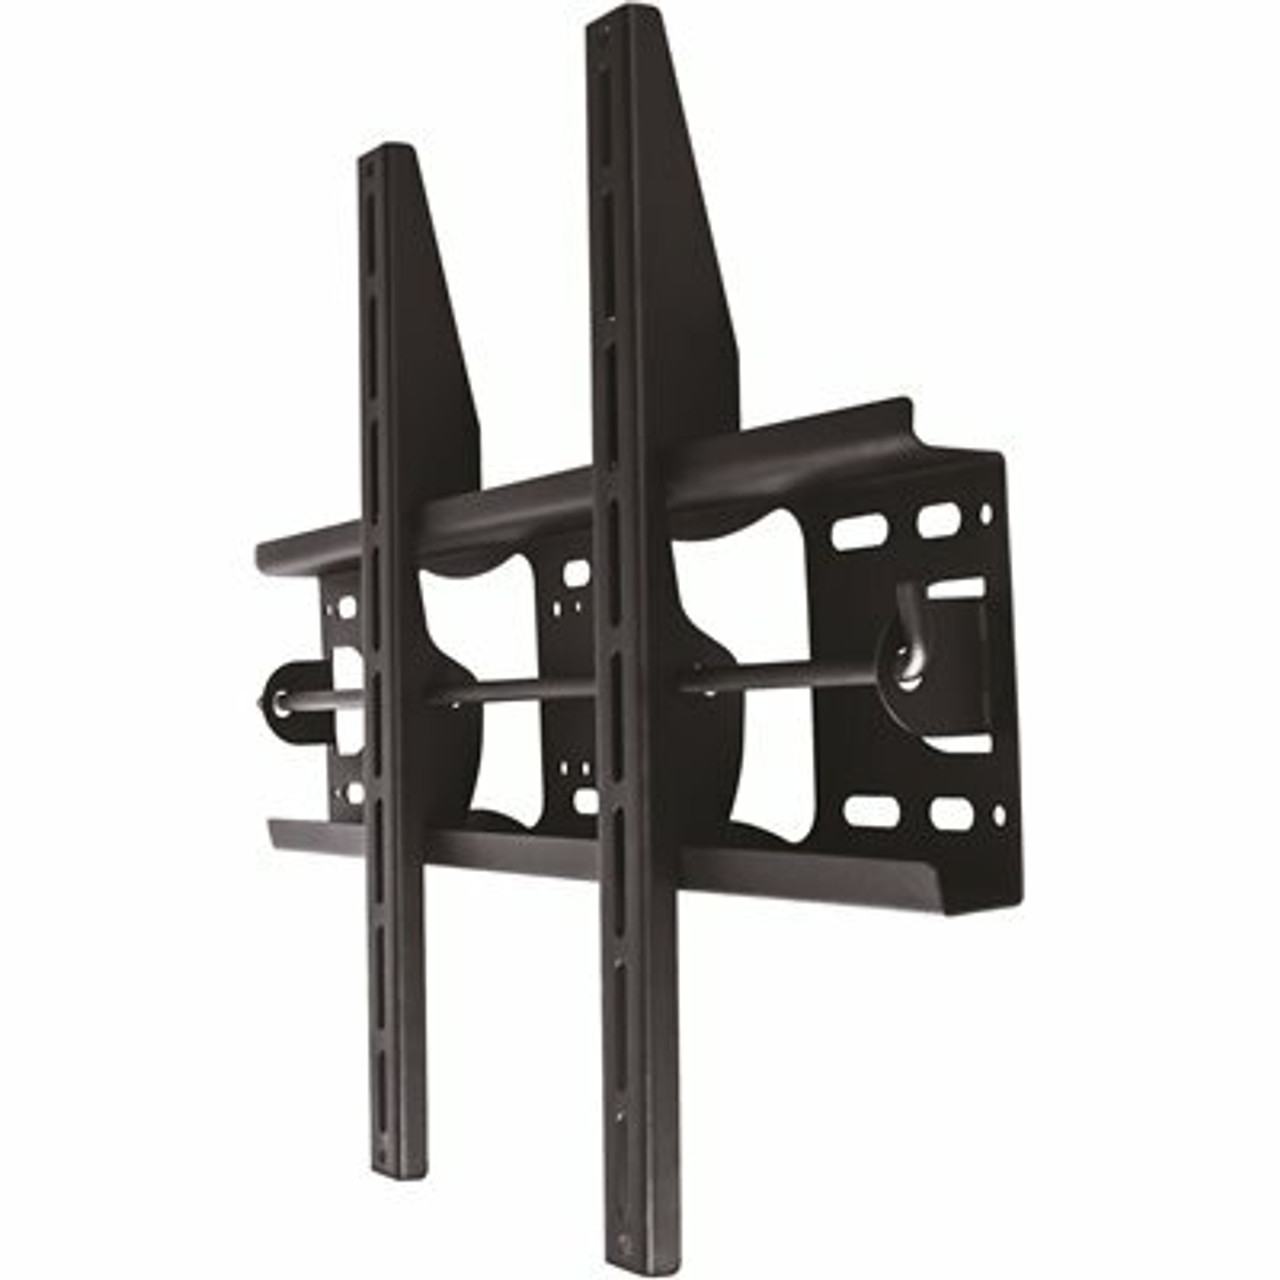 Continu-Us Universal Tilt Wall Mount For 32 In. - 55 In., 88 Lbs. Max In Black